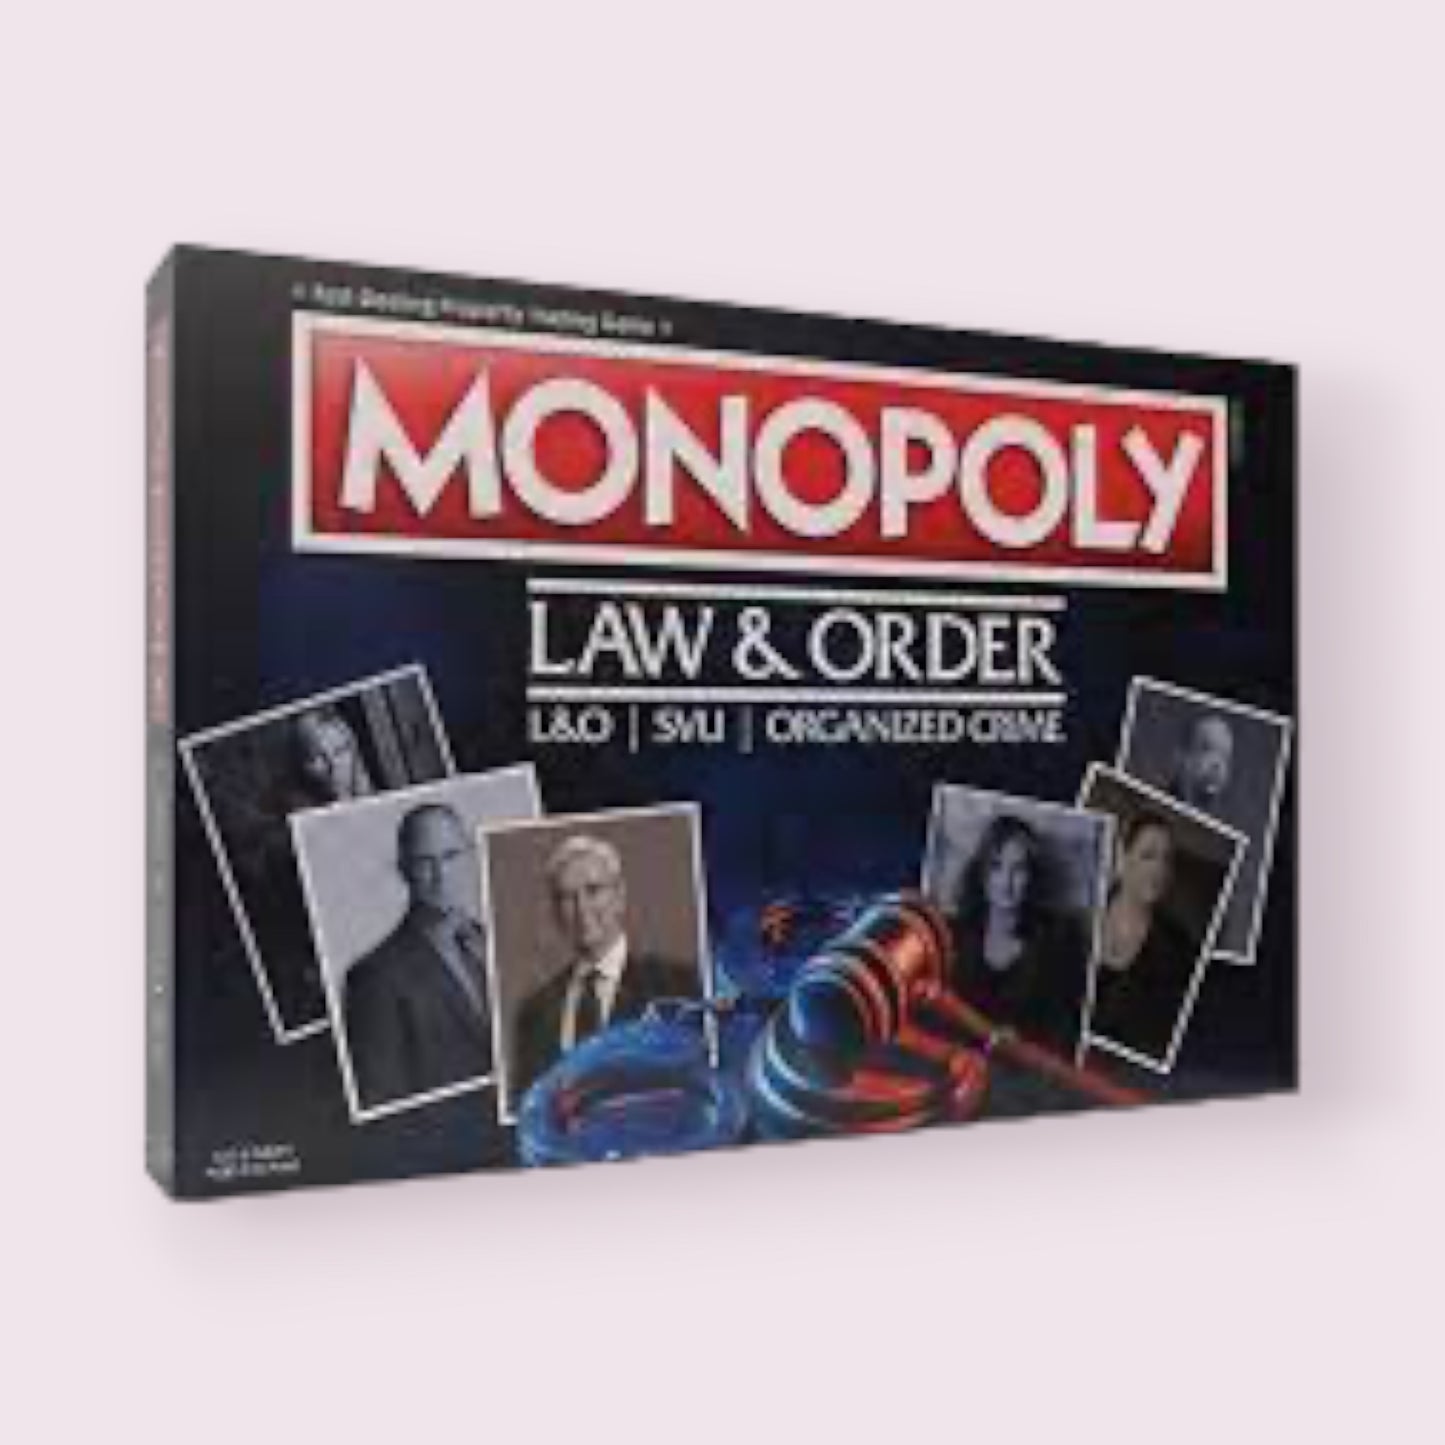 Law and Order Monopoly Game  Pixie Candy Shoppe   